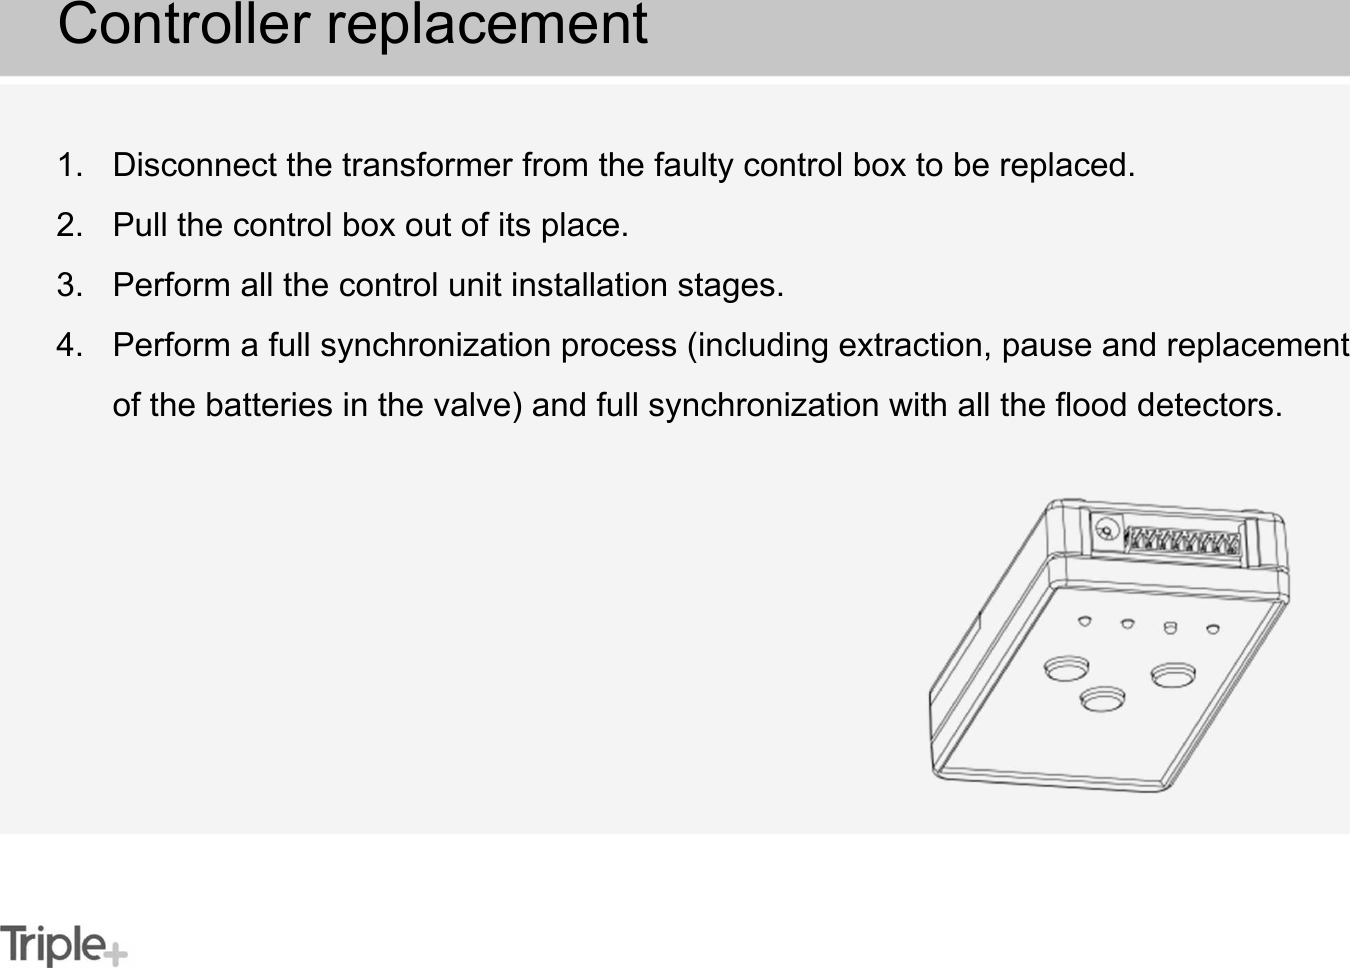 1. Disconnect the transformer from the faulty control box to be replaced.2. Pull the control box out of its place.3. Perform all the control unit installation stages.4. Perform a full synchronization process (including extraction, pause and replacement of the batteries in the valve) and full synchronization with all the flood detectors.Controller replacement